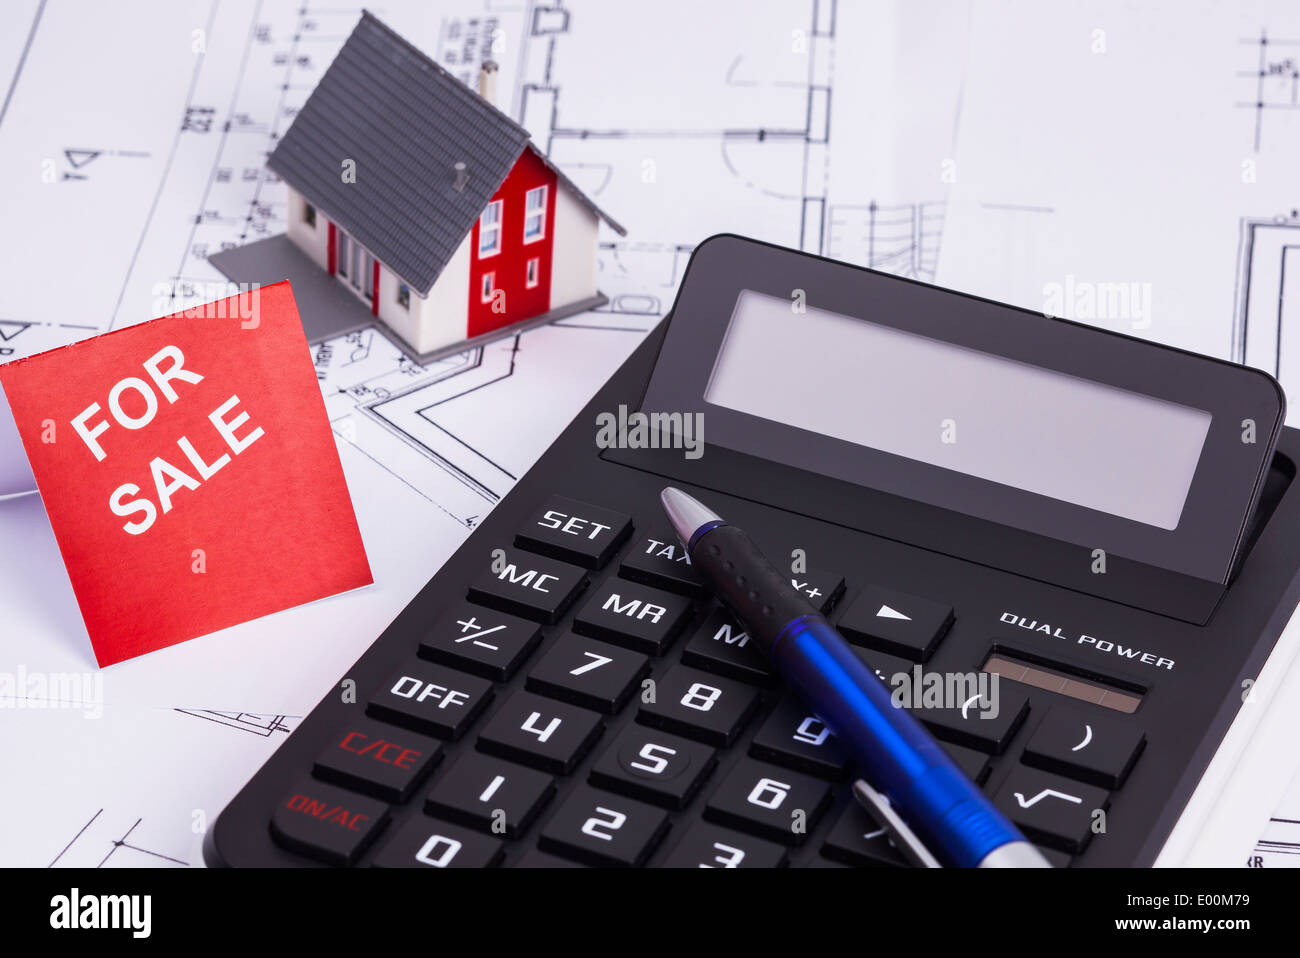 The image shows a calculator and a sold house Stock Photo